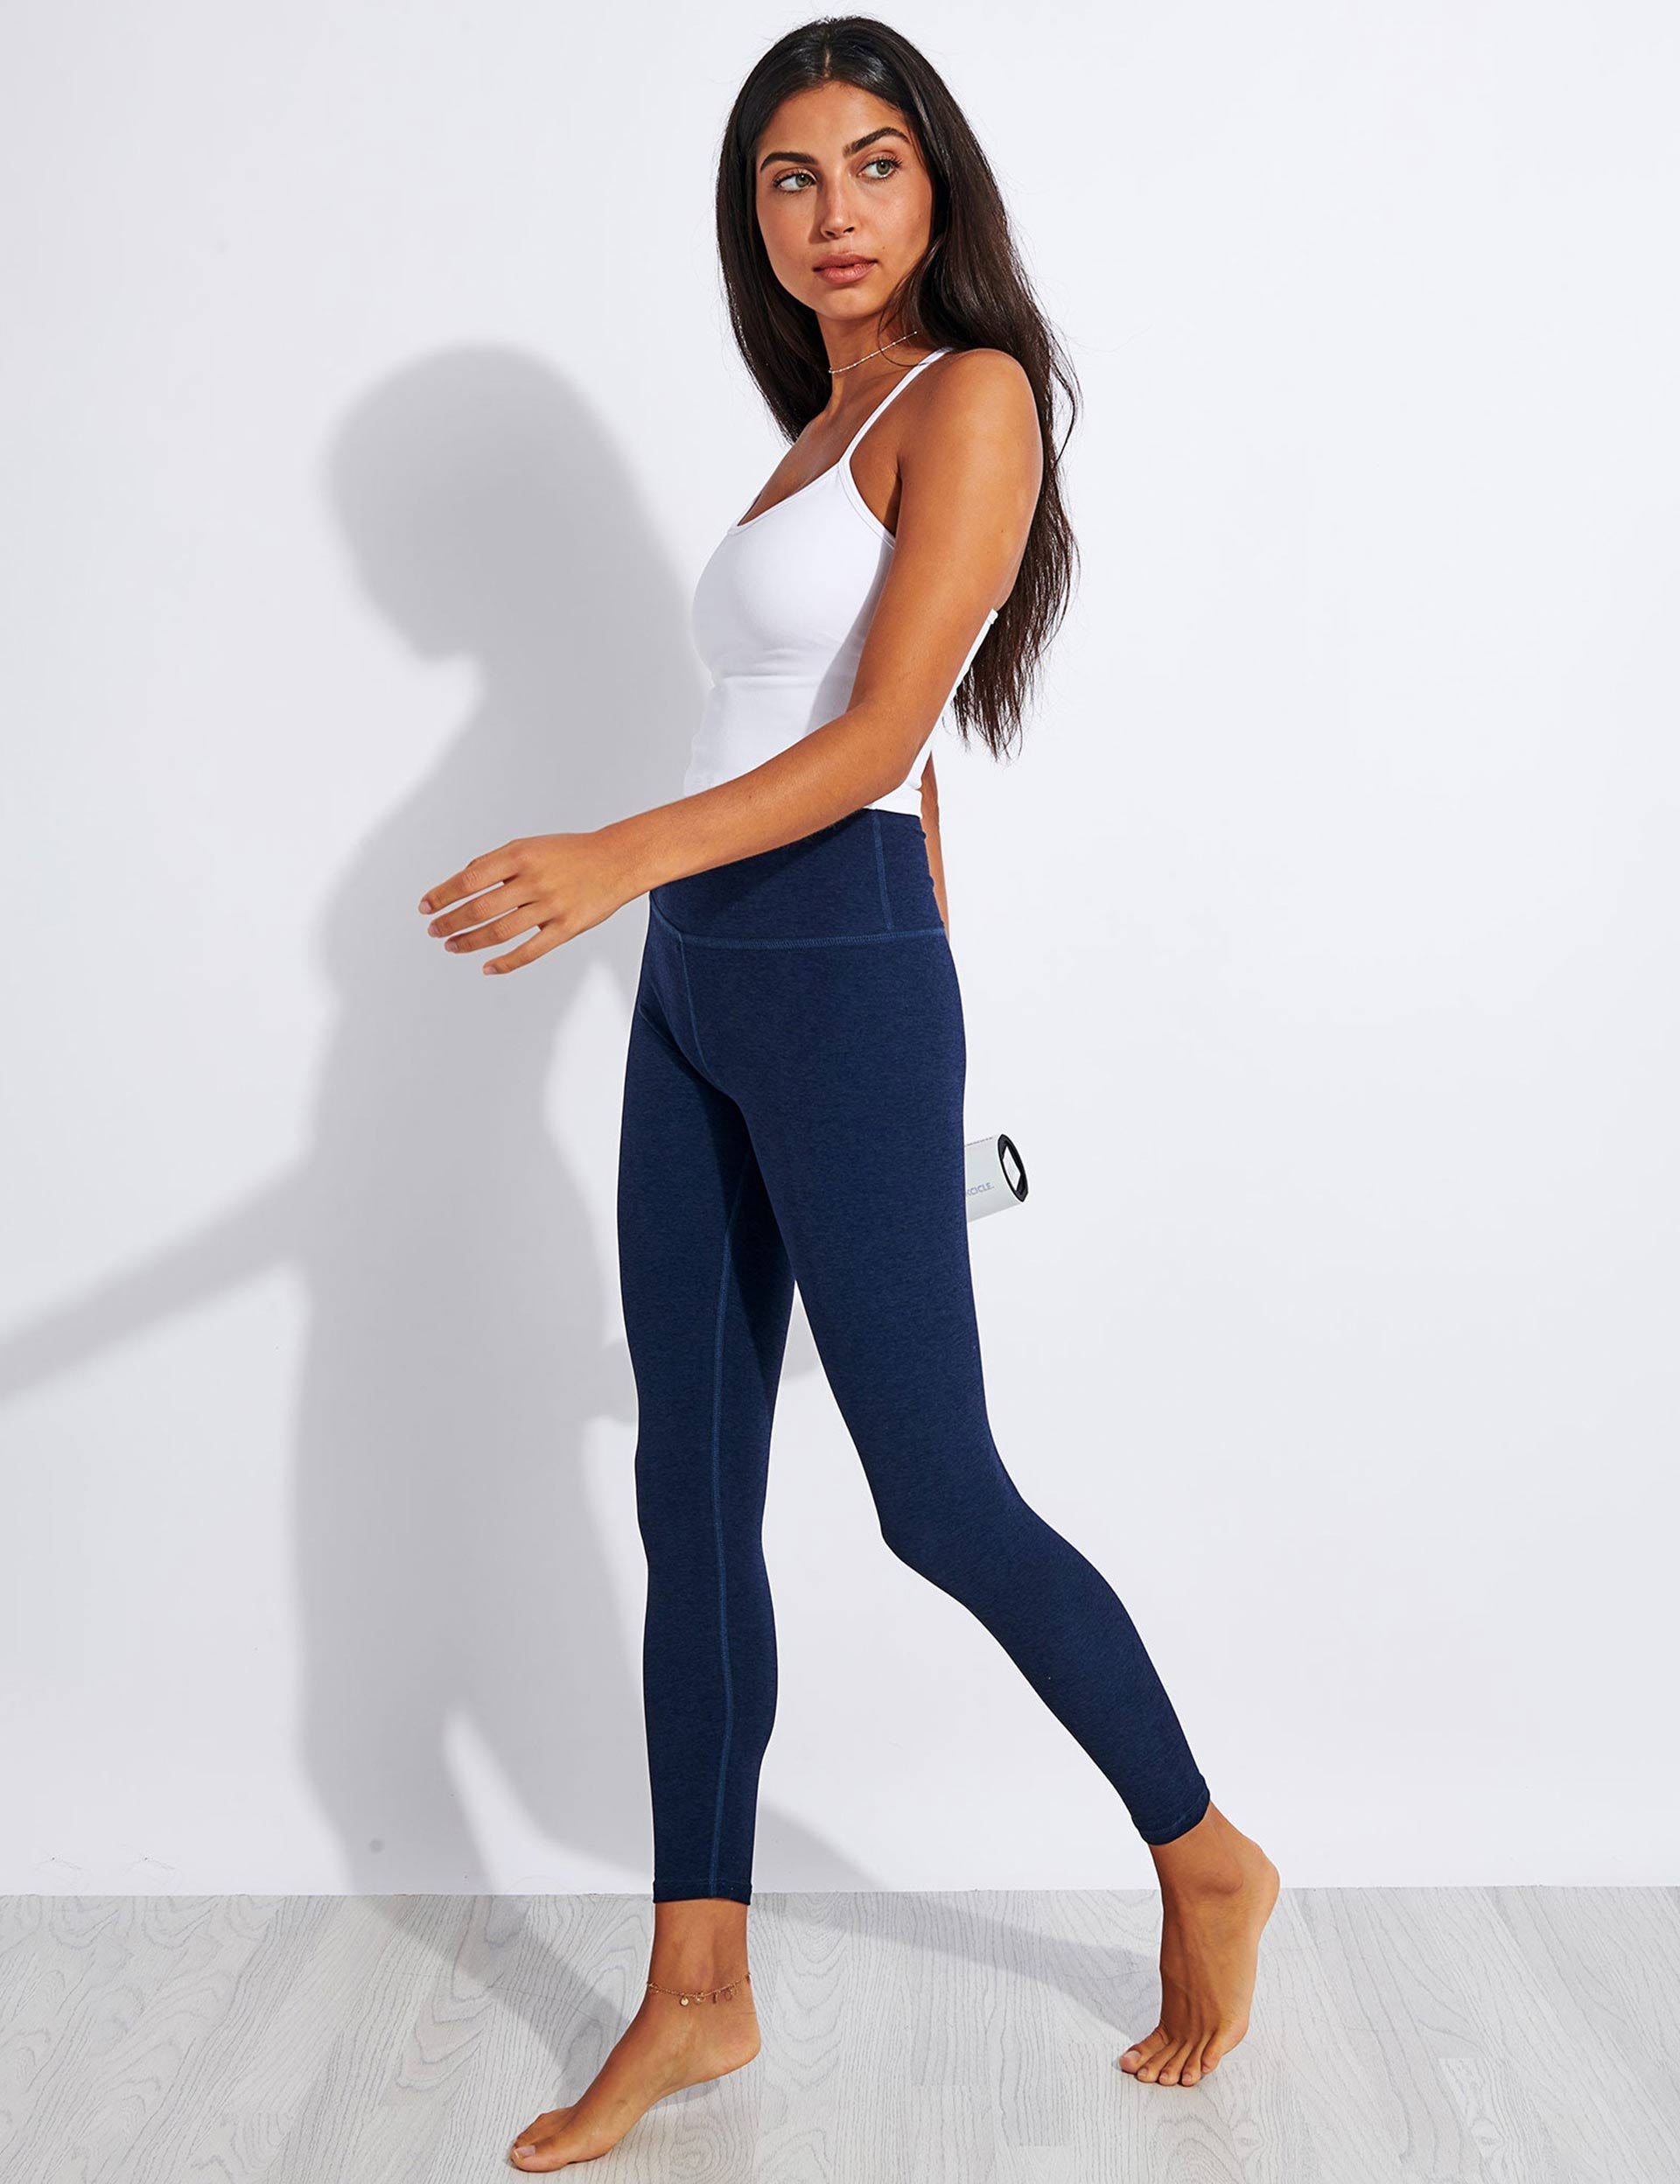 Spacedye At Your Leisure High Waisted Midi Legging - Nocturnal Navy